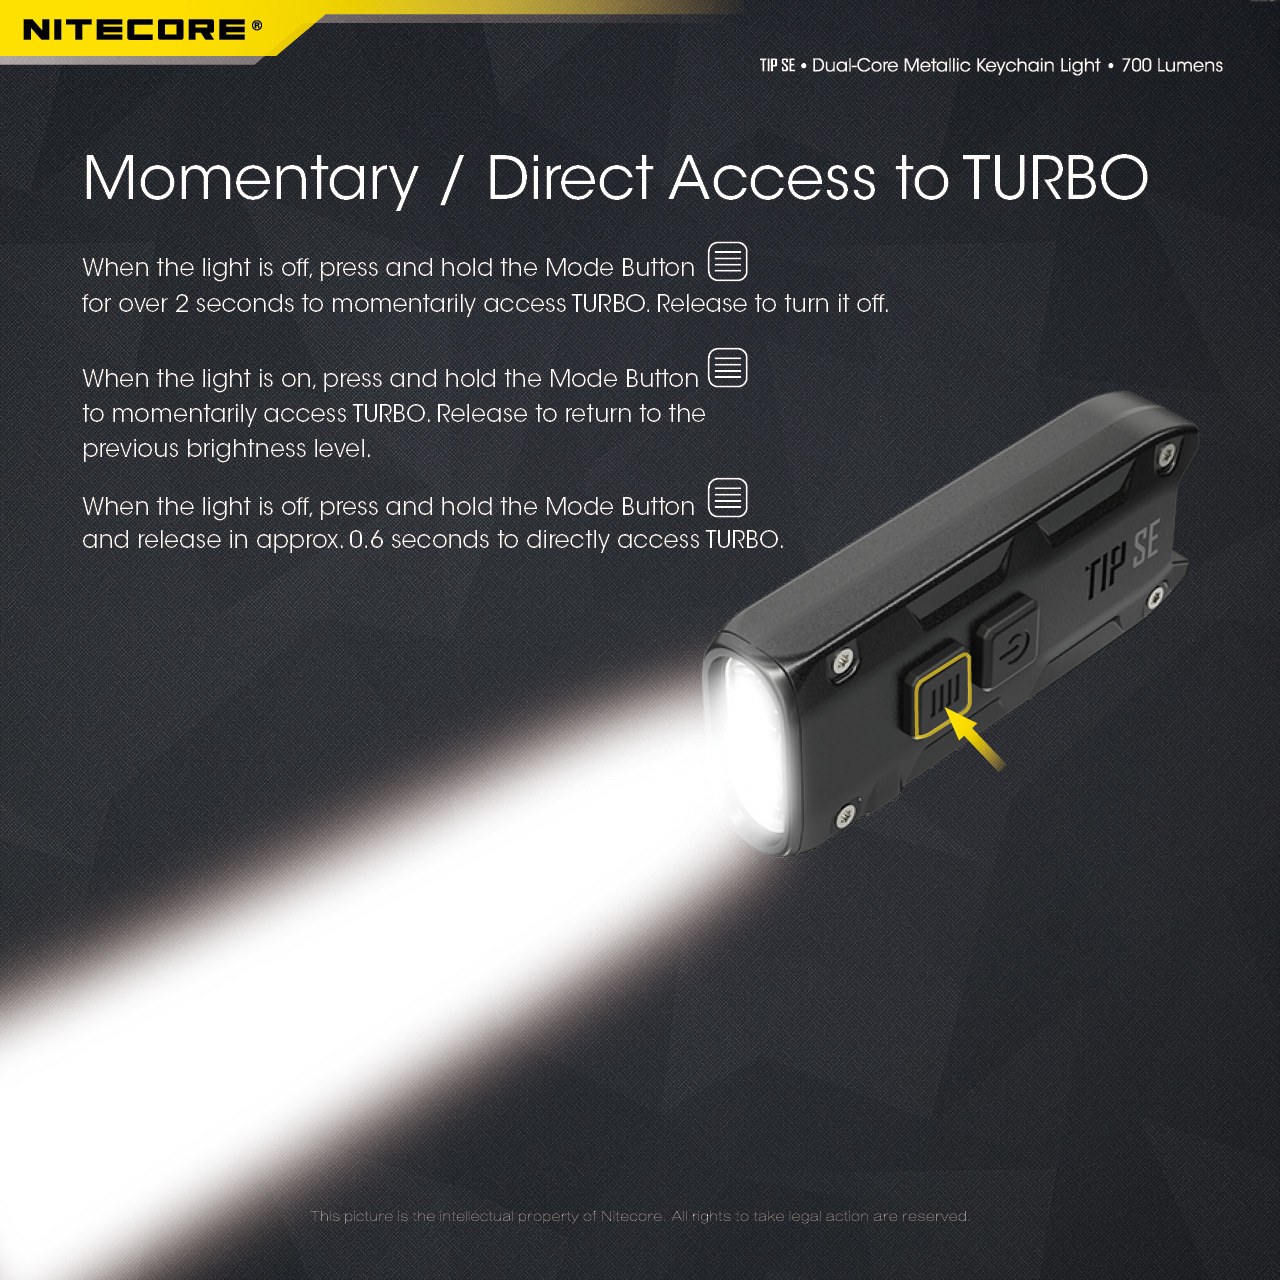 NITECORE-TIP-SE-700LM-P8-Dual-Light-LED-Keychain-Flashlight-Type-C-Rechargeable-QC-Every-Day-Carry-M-1976045-13